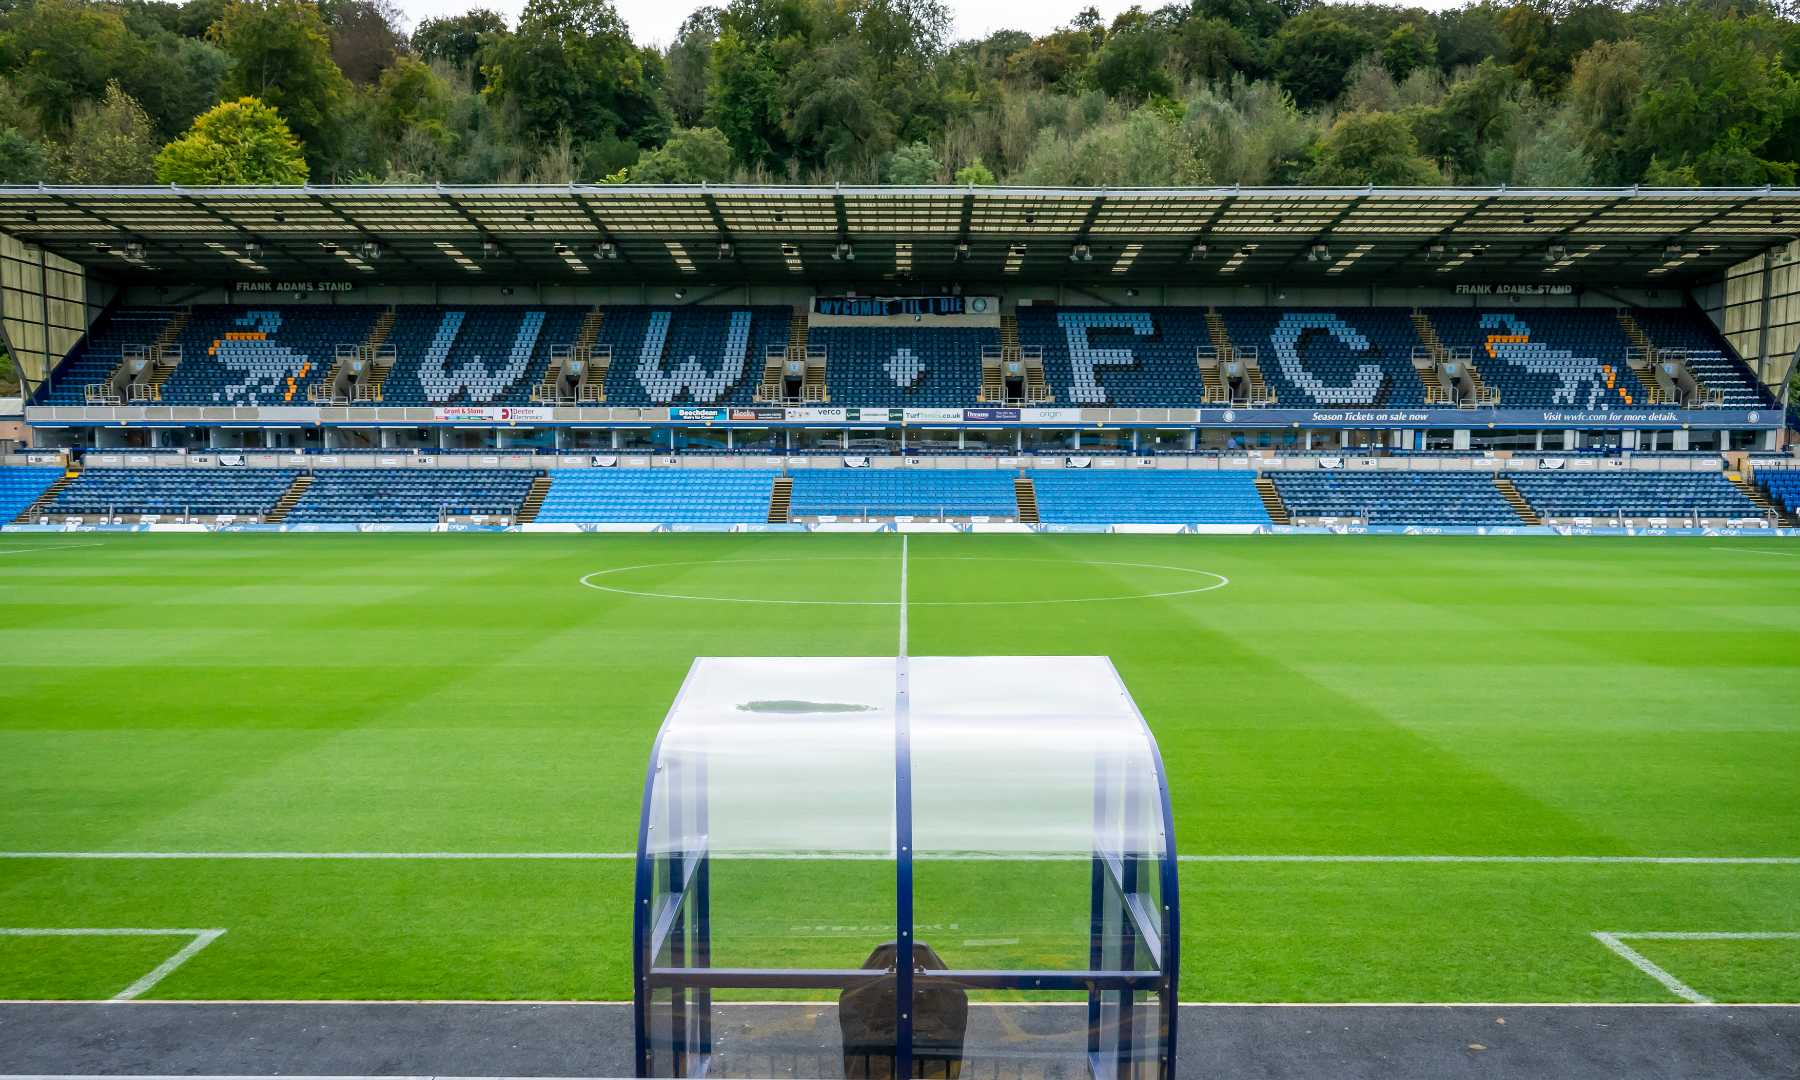 Bosch provides fully IP-based emergency solution at Wycombe Wanderers’ Adams Park